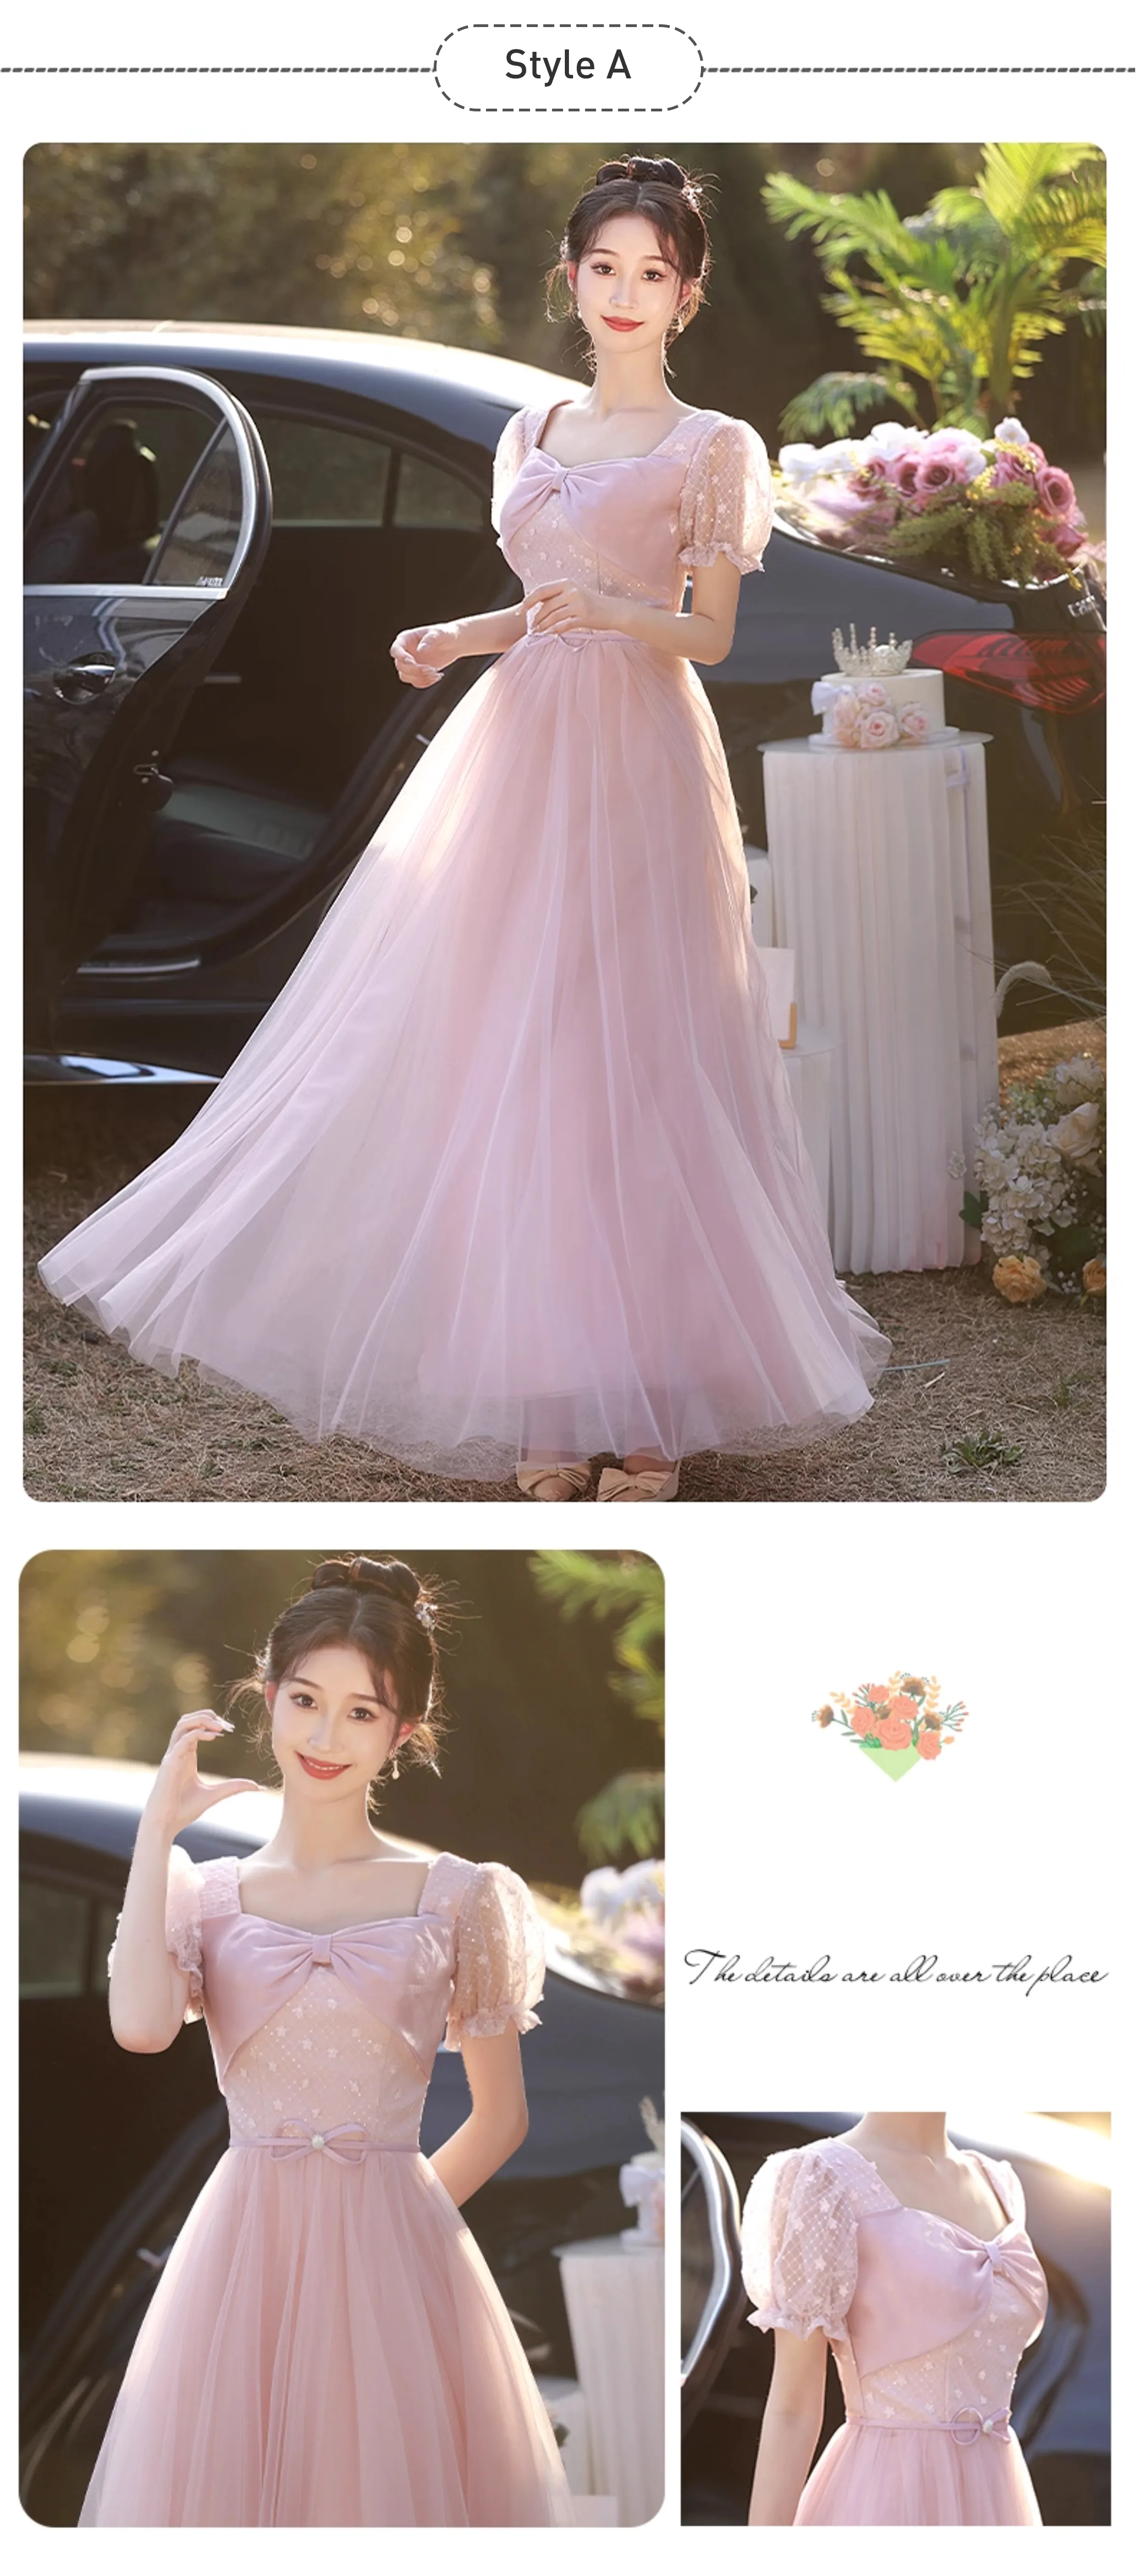 Sweet-Off-the-Shoulder-Pink-Birthday-Party-Bridesmaid-Dress-Evening-Gown18